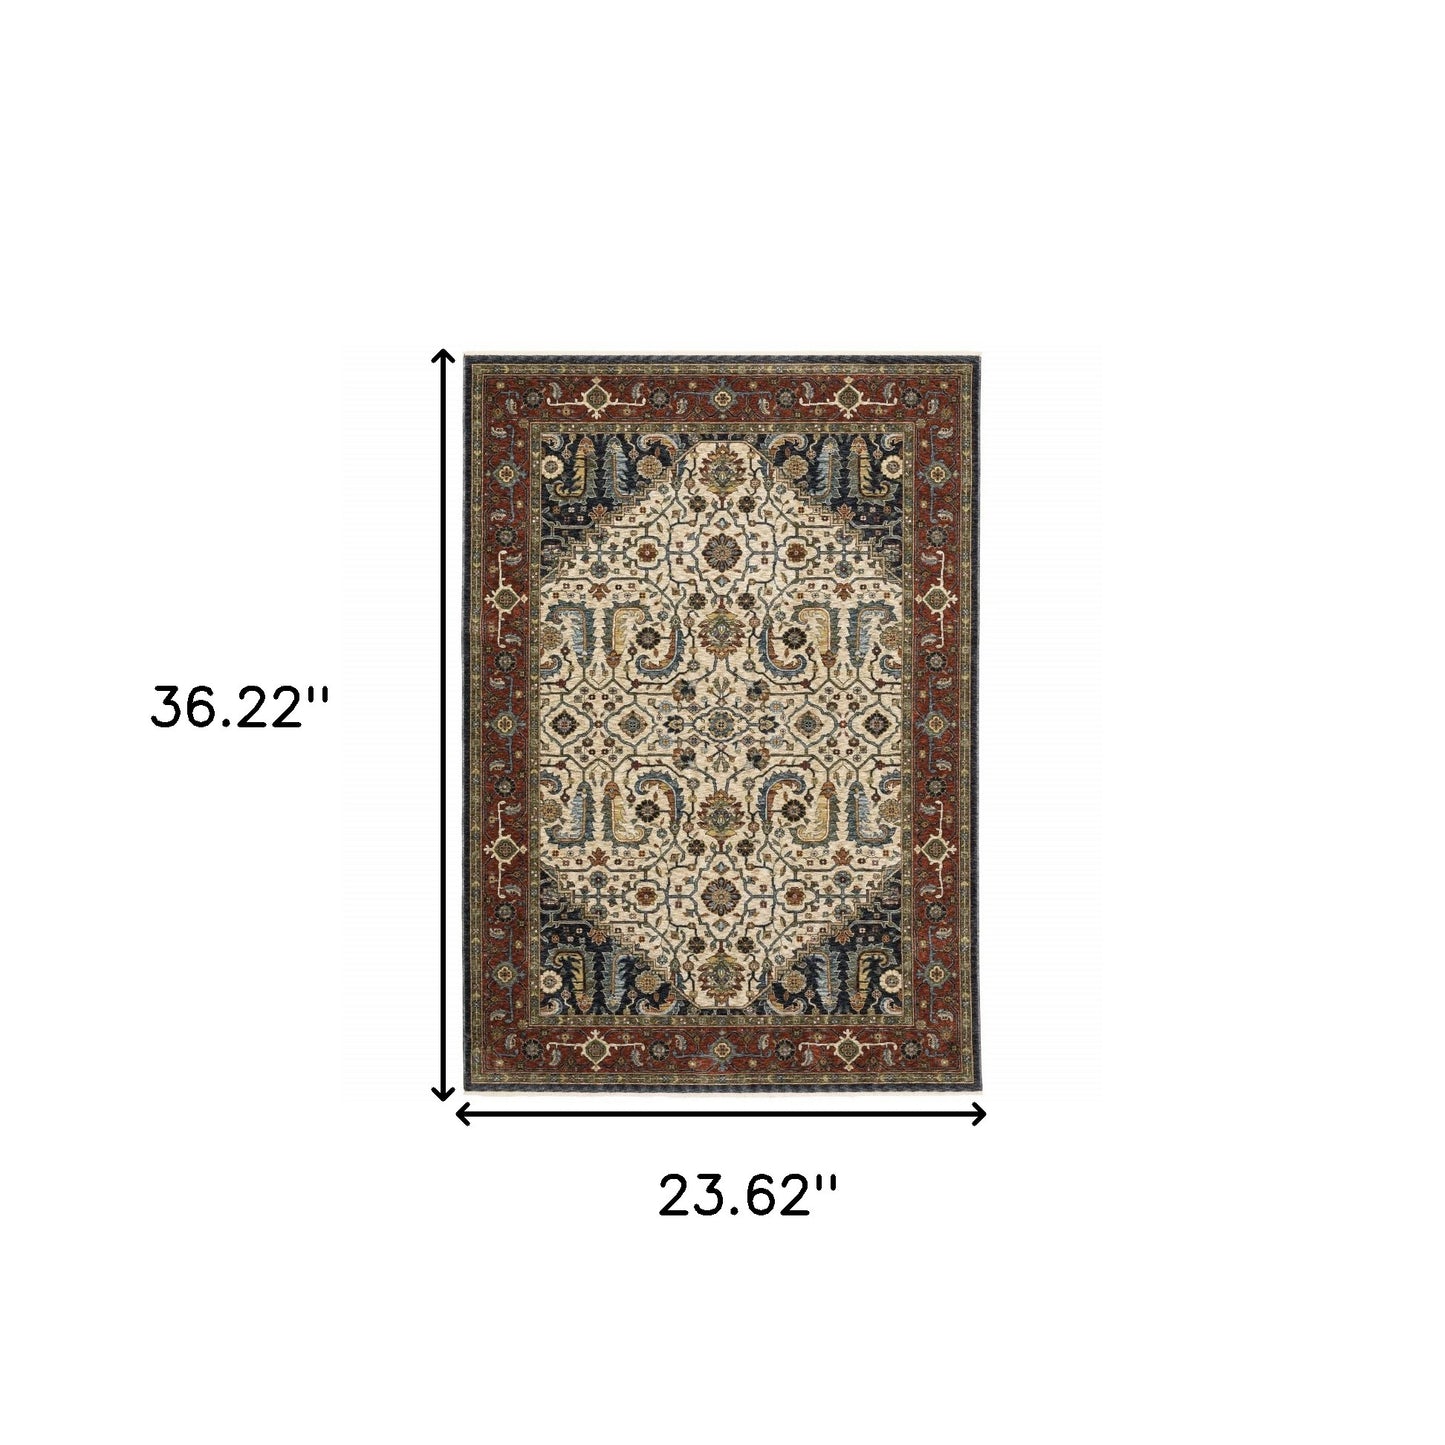 2' X 3' Ivory Beige Red Blue Gold Green And Navy Oriental Power Loom Stain Resistant Area Rug With Fringe